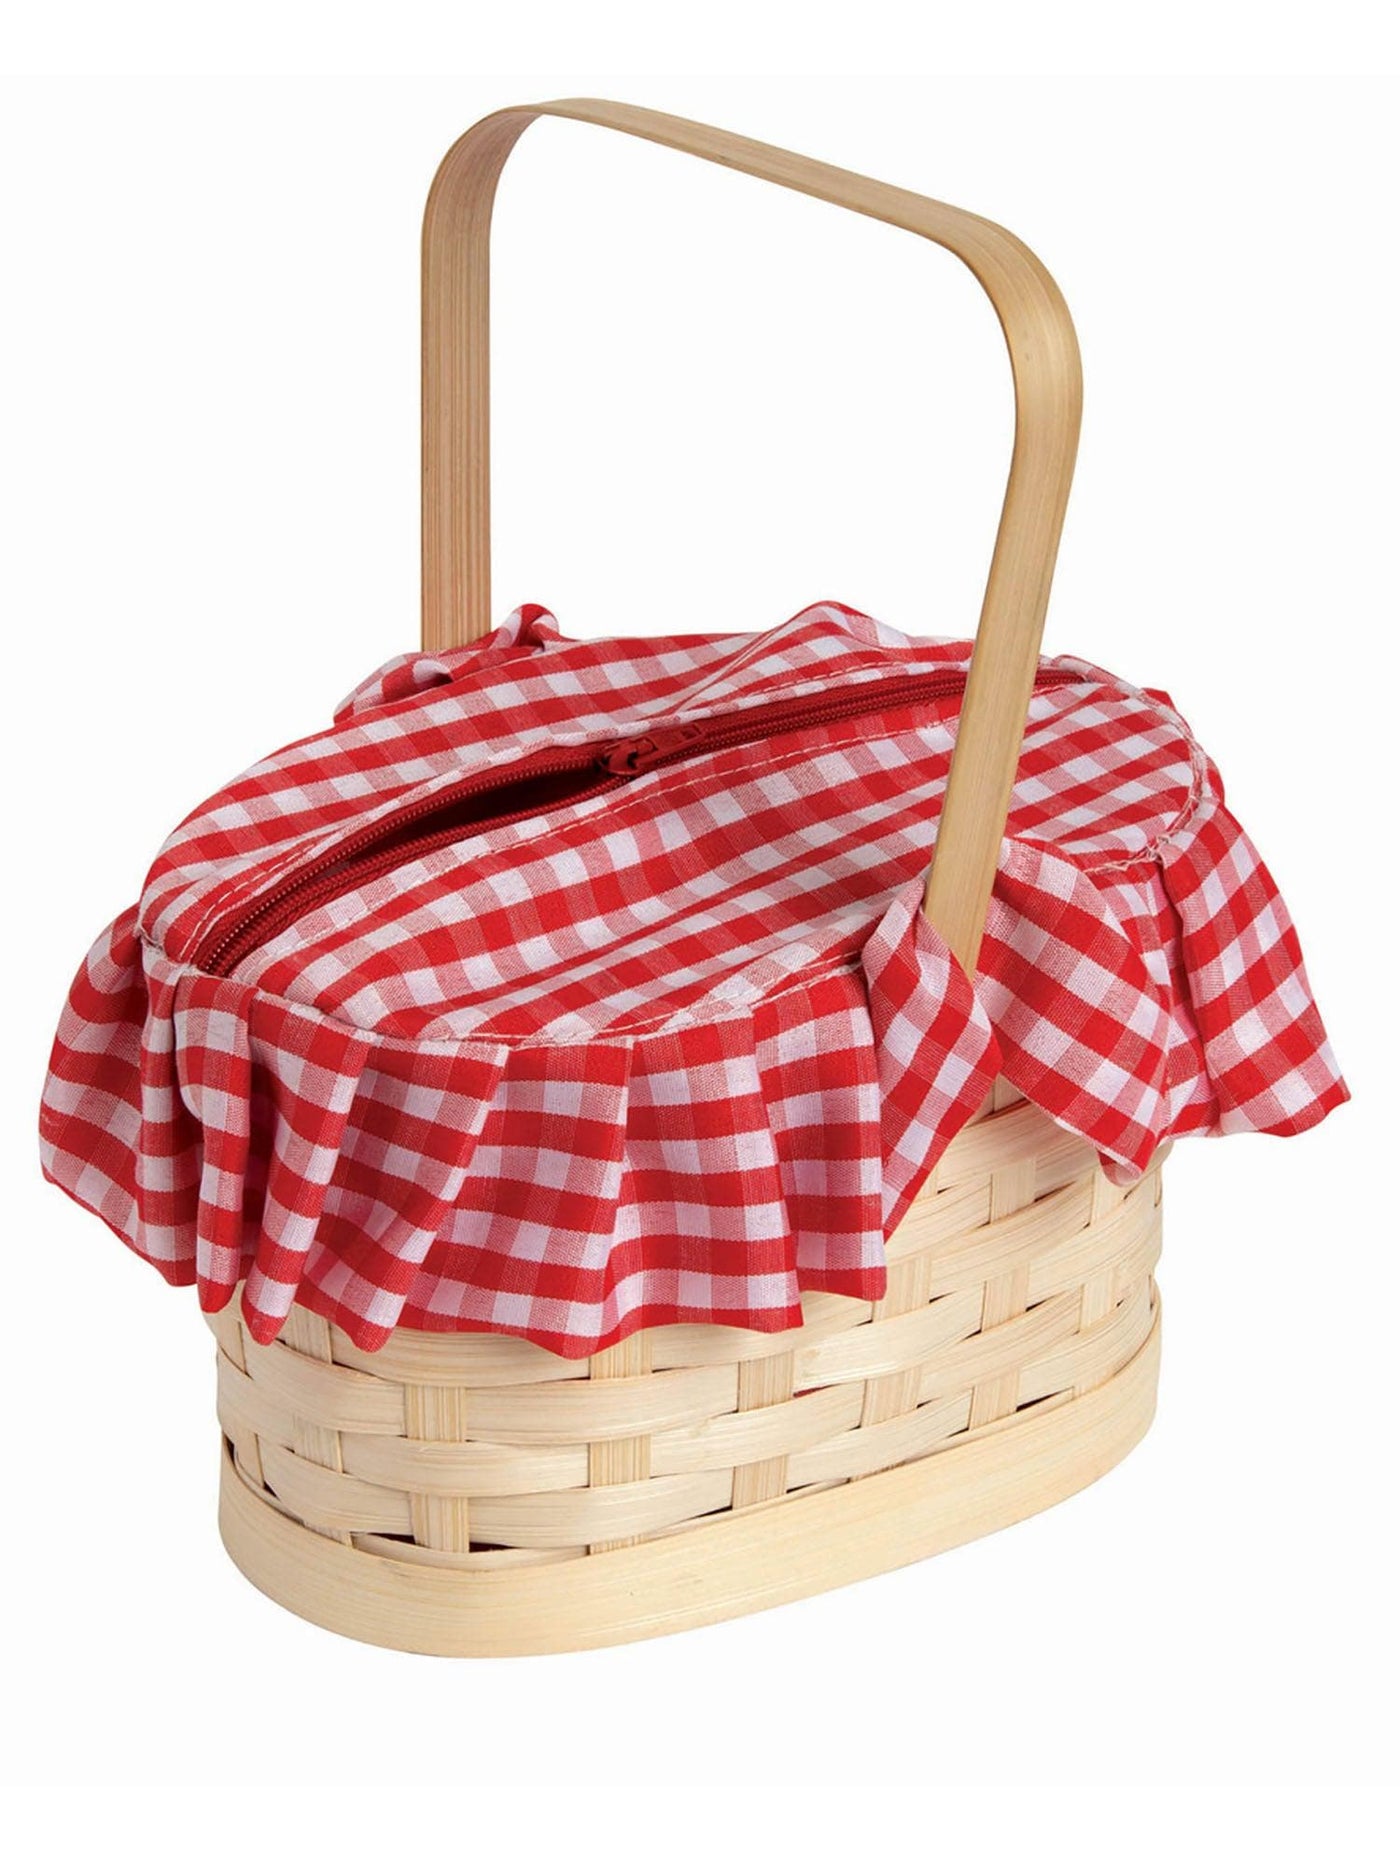 The Wizard of Oz Gingham Basket Costume Prop